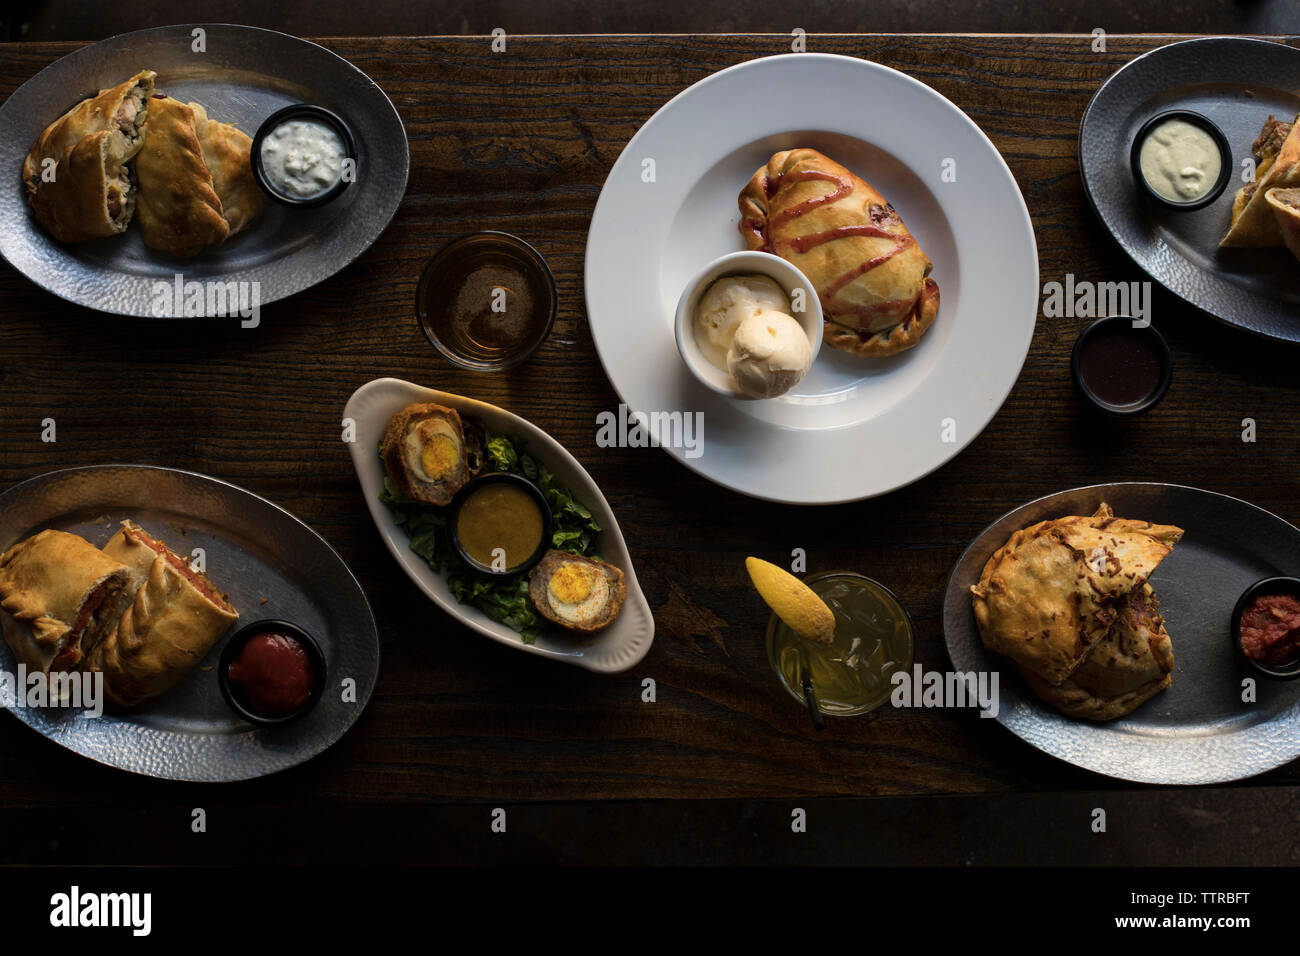 Overhead view of food in plates on dining table at restaurant Stock Photo